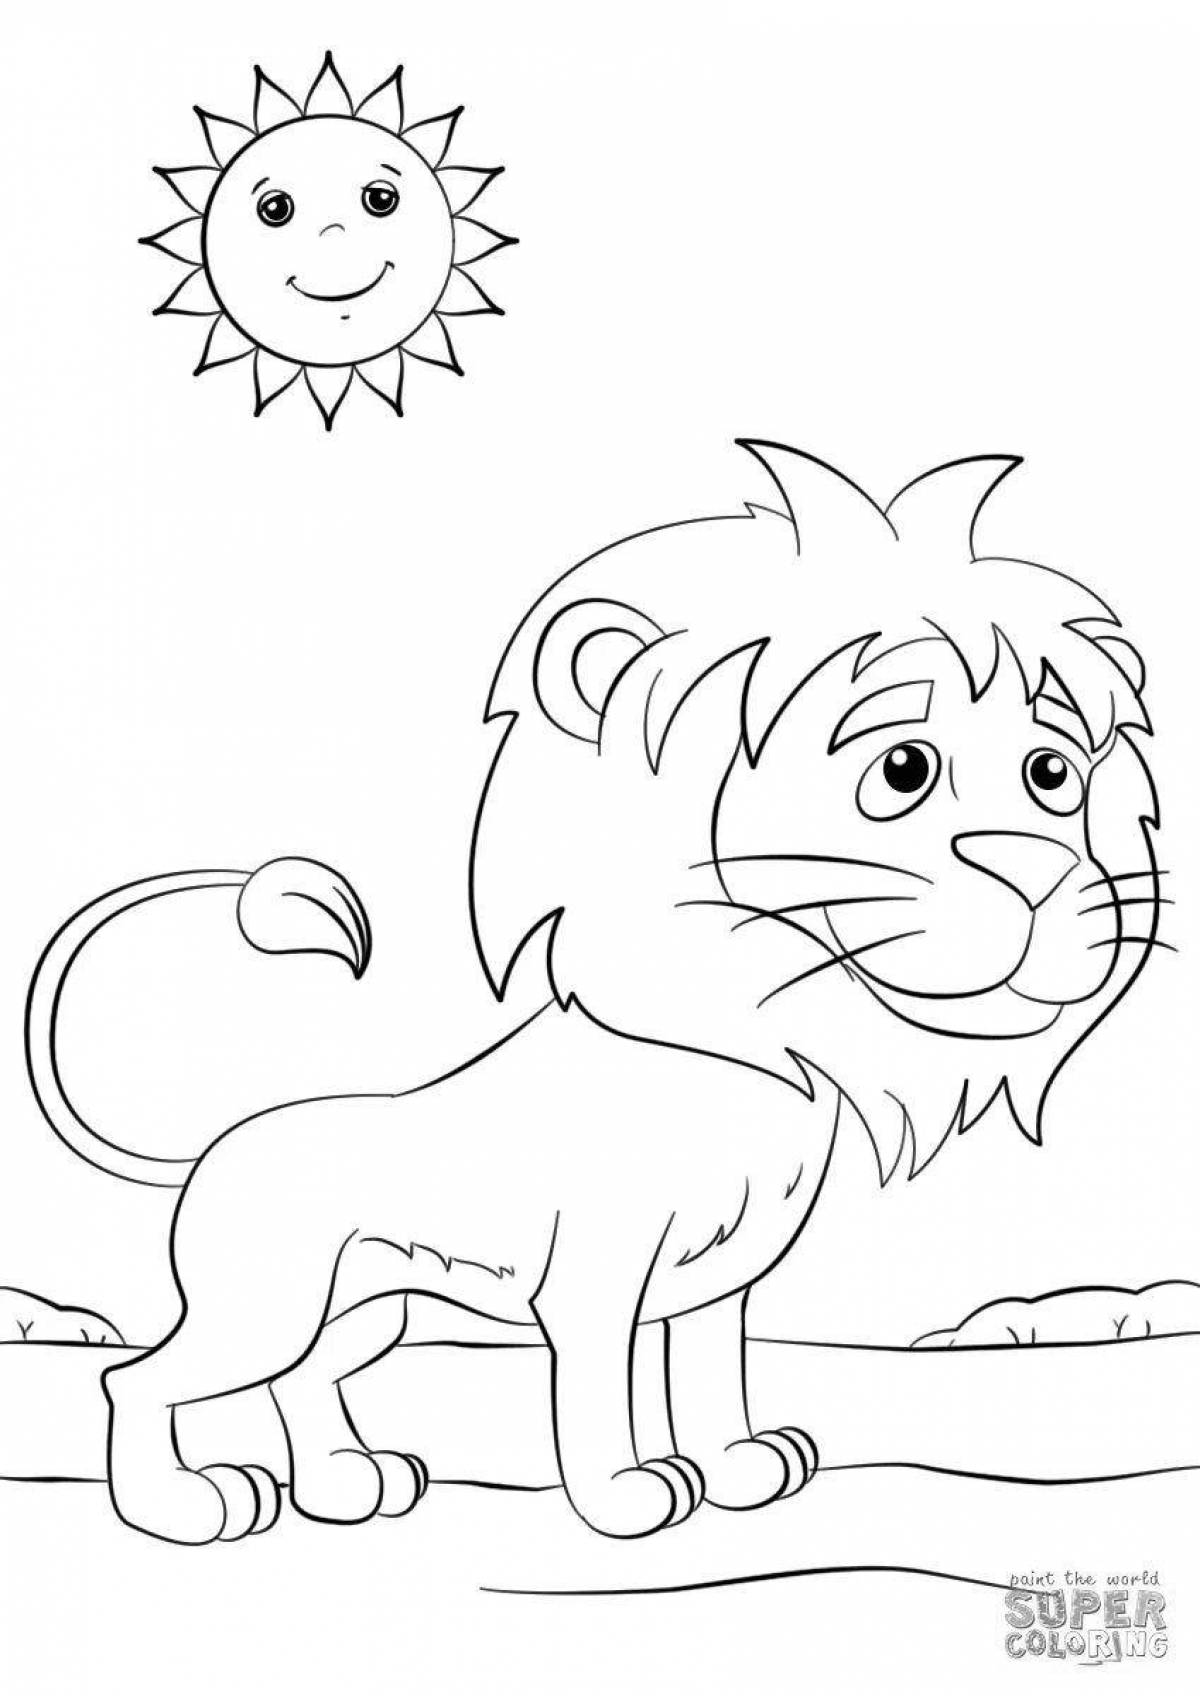 Bright lion coloring book for kids